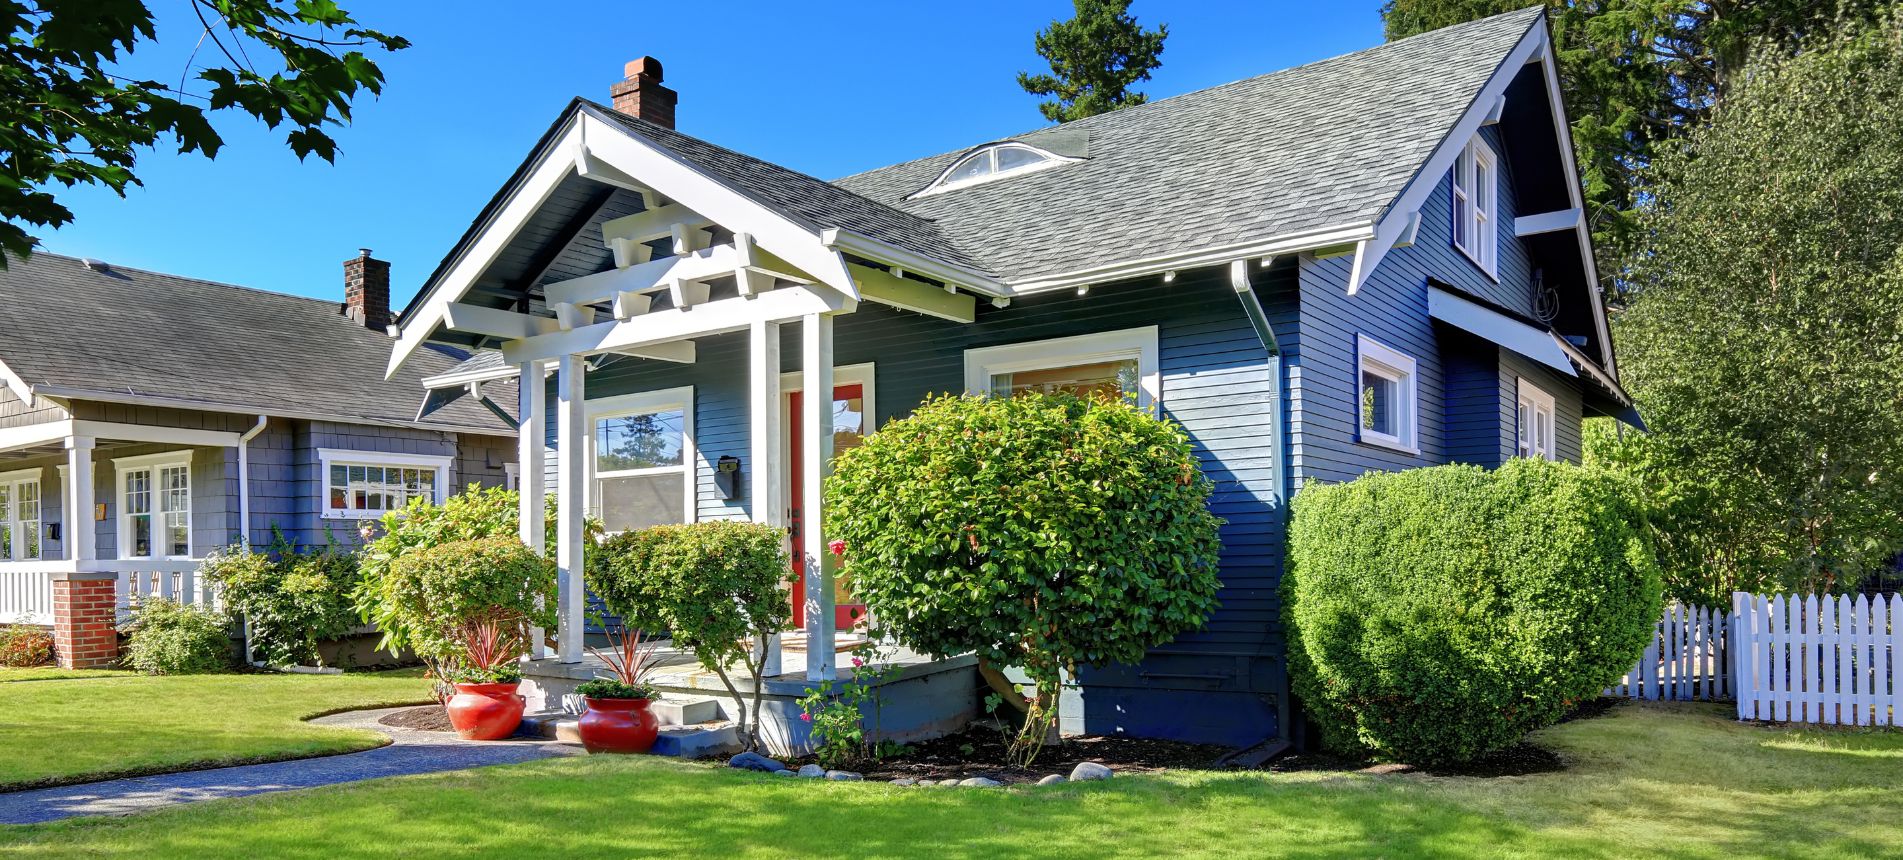 Curb Appeal Updates To Consider This Summer